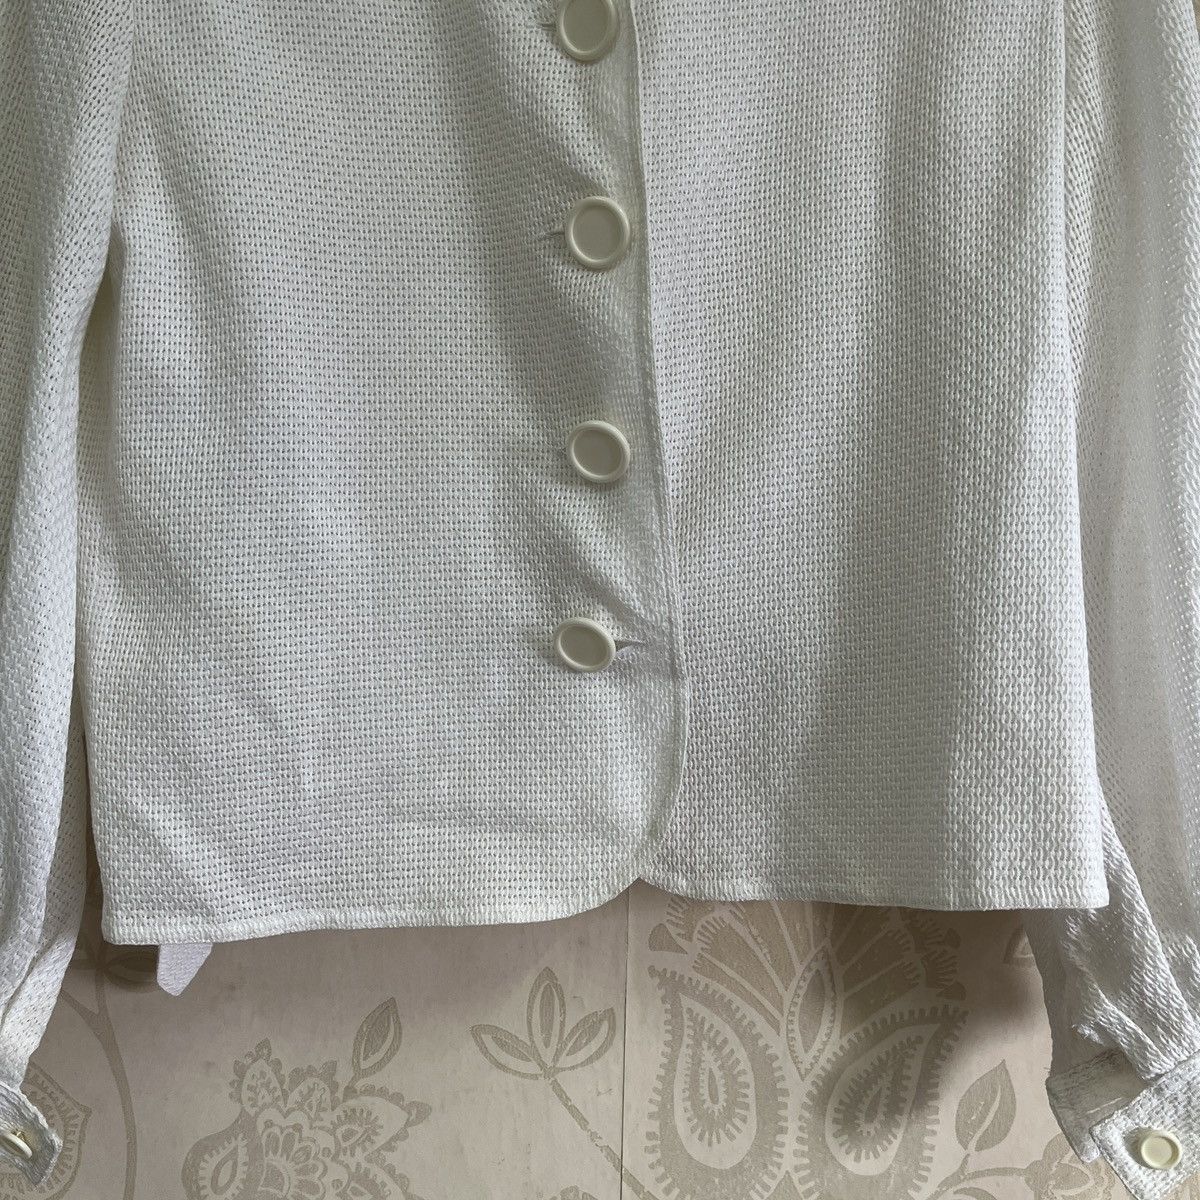 Gently Used Vintage Christian Dior Blouse Size M - 9